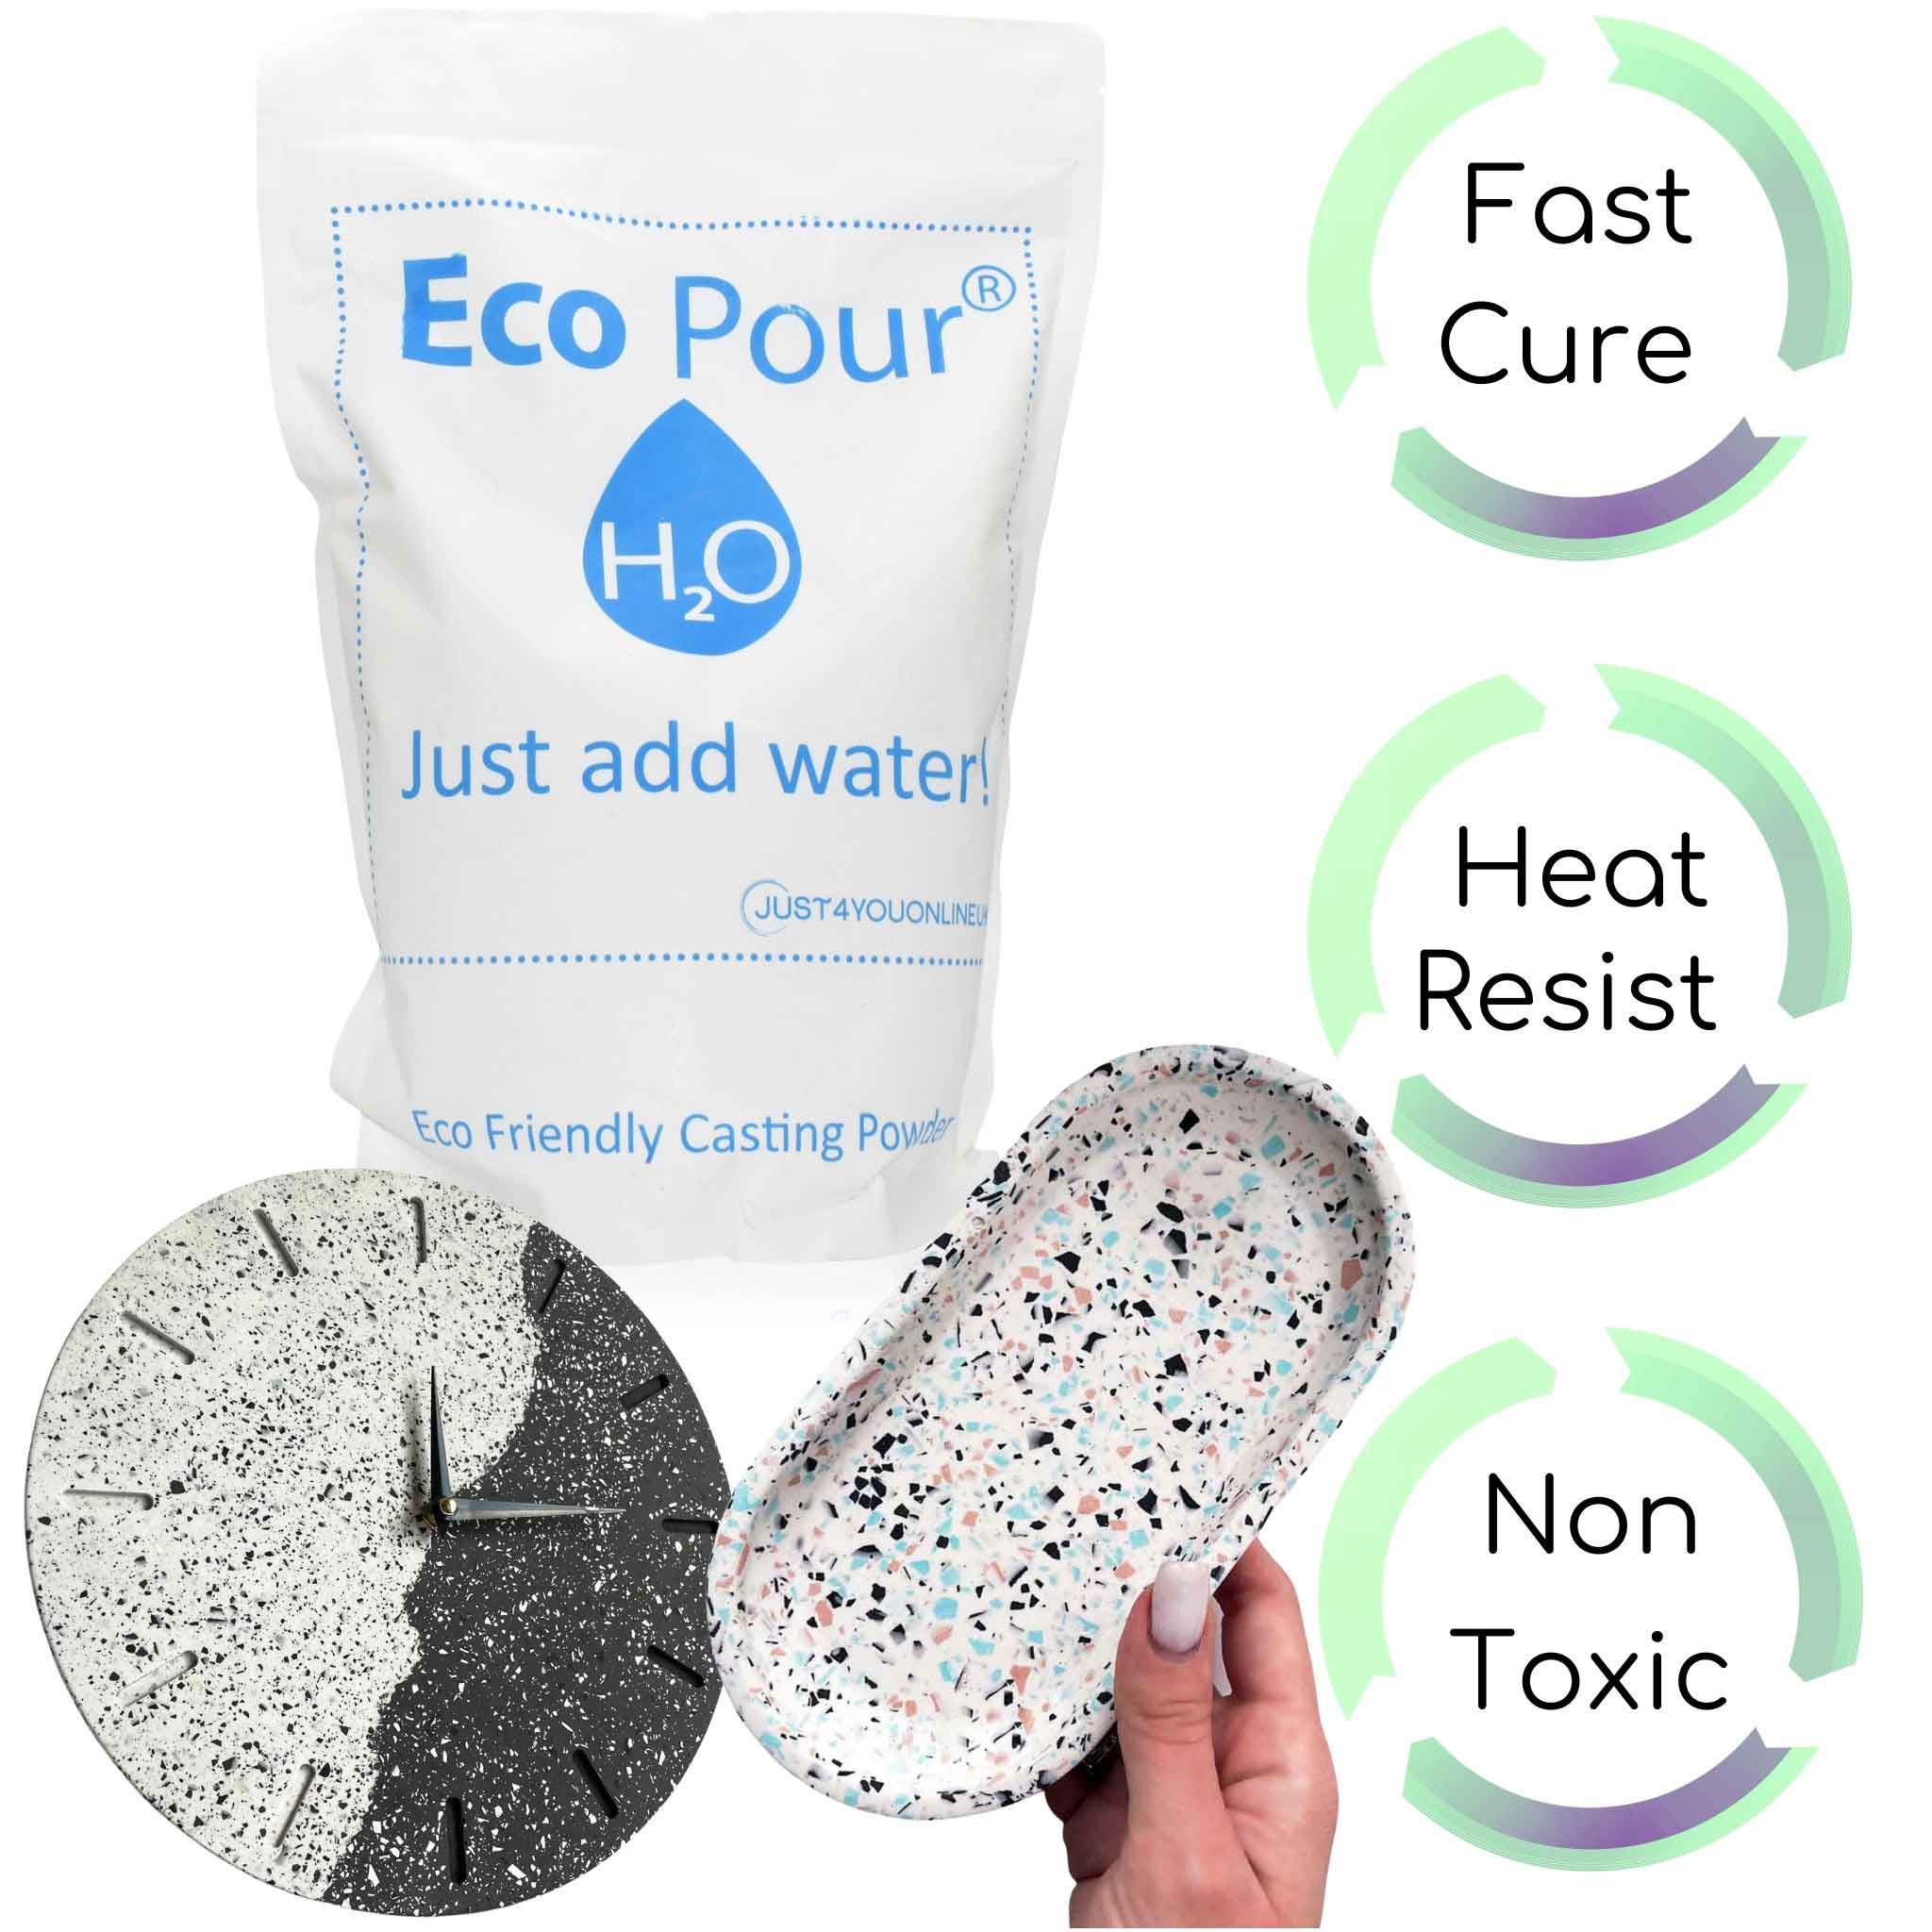 Eco Resin - Eco Pour® Eco friendly resin for crafts, casting resin